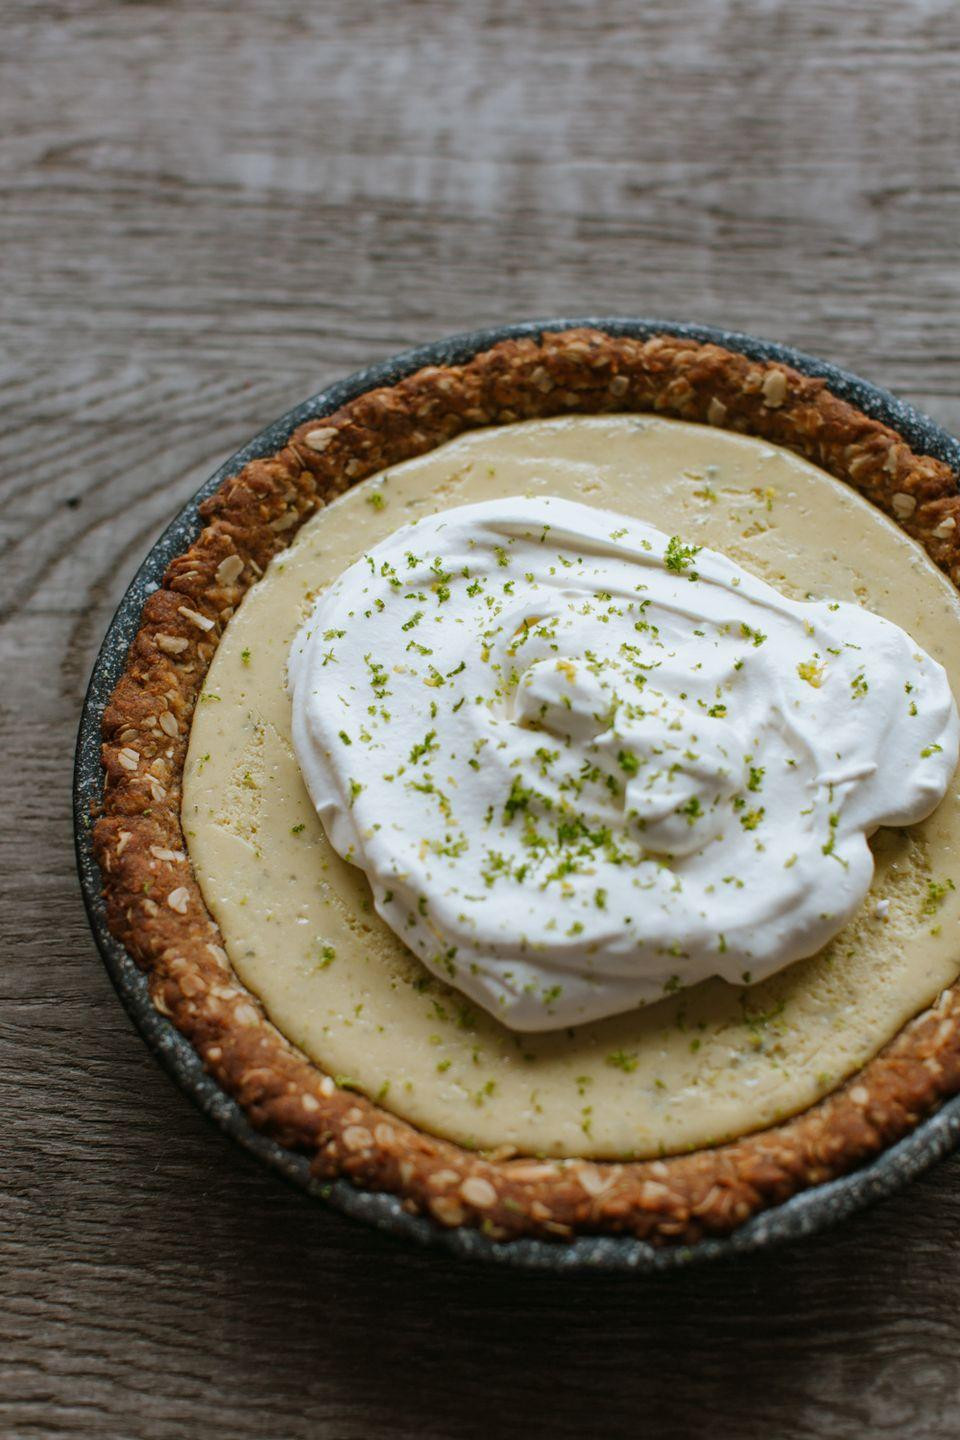 Easter Sunday Desserts
 The Best Easter Sunday Desserts Like Key Lime Pie